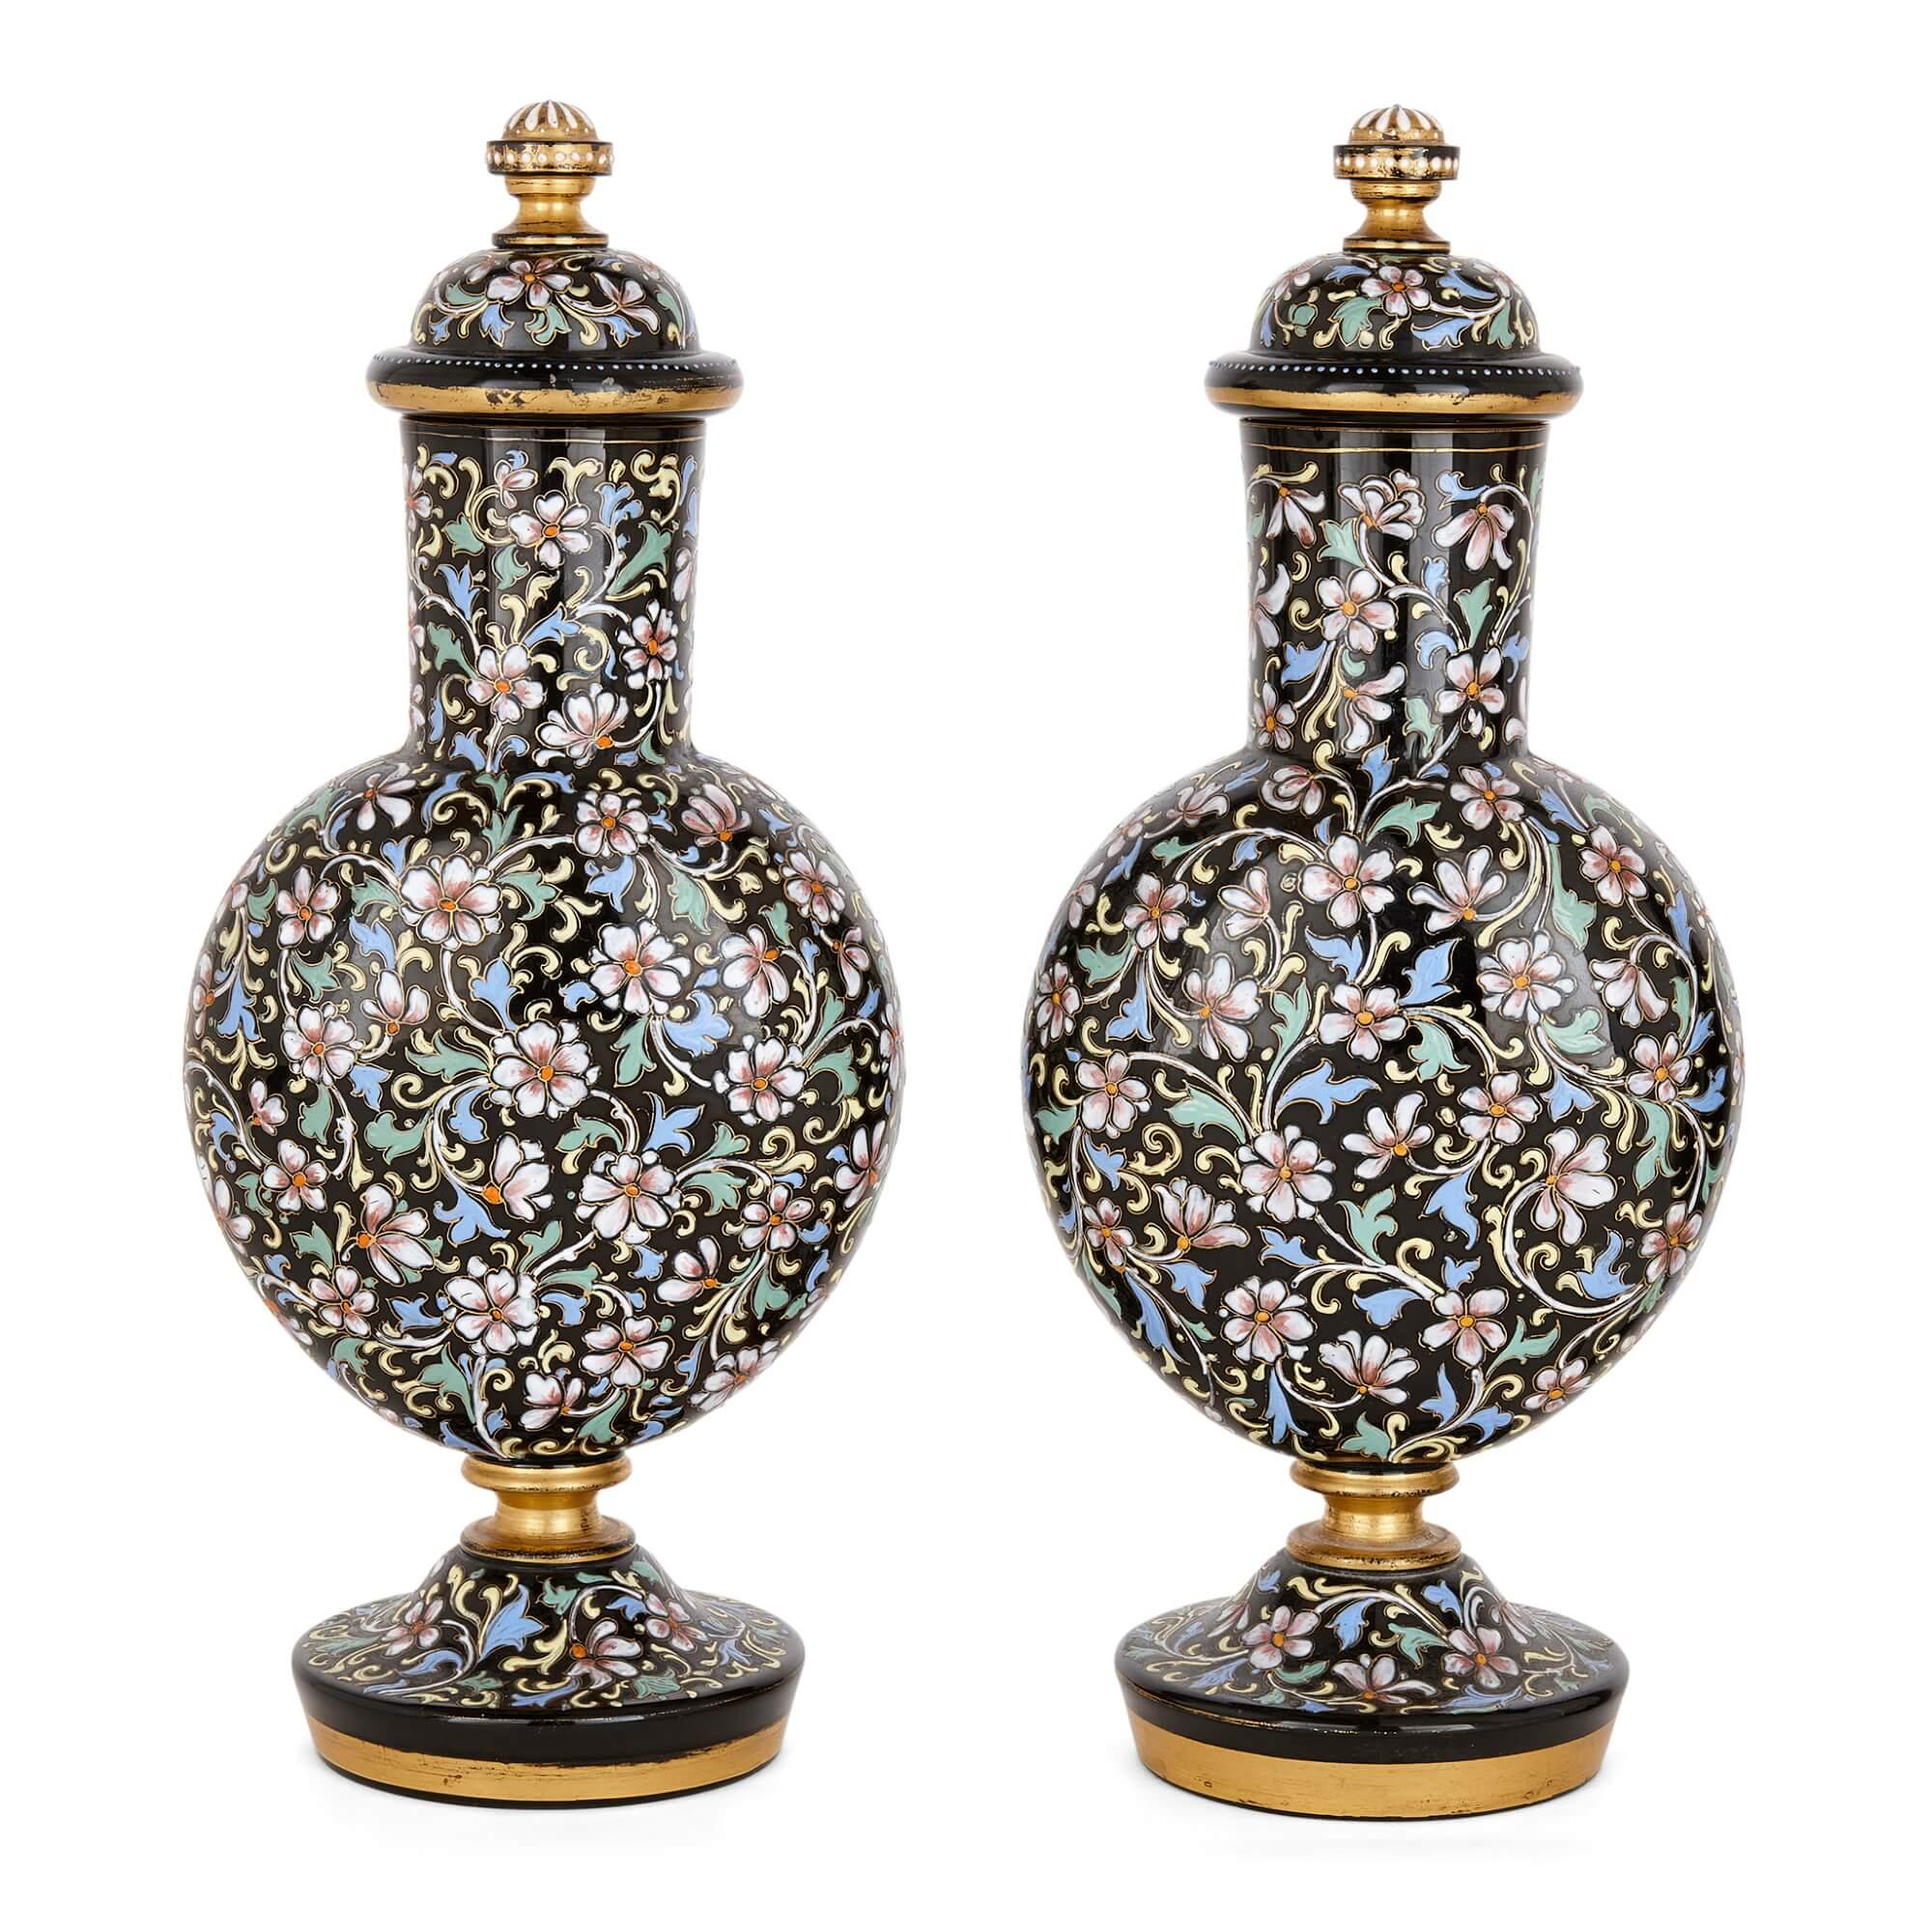 A pair of Bohemian enamelled black glass vases and covers
Bohemian, Late 19th century
Measures: Height 37cm, width 16cm, depth 12cm

Beautifully decorated with intricate floral motifs in pale pastel tones, these charming vases were made in late